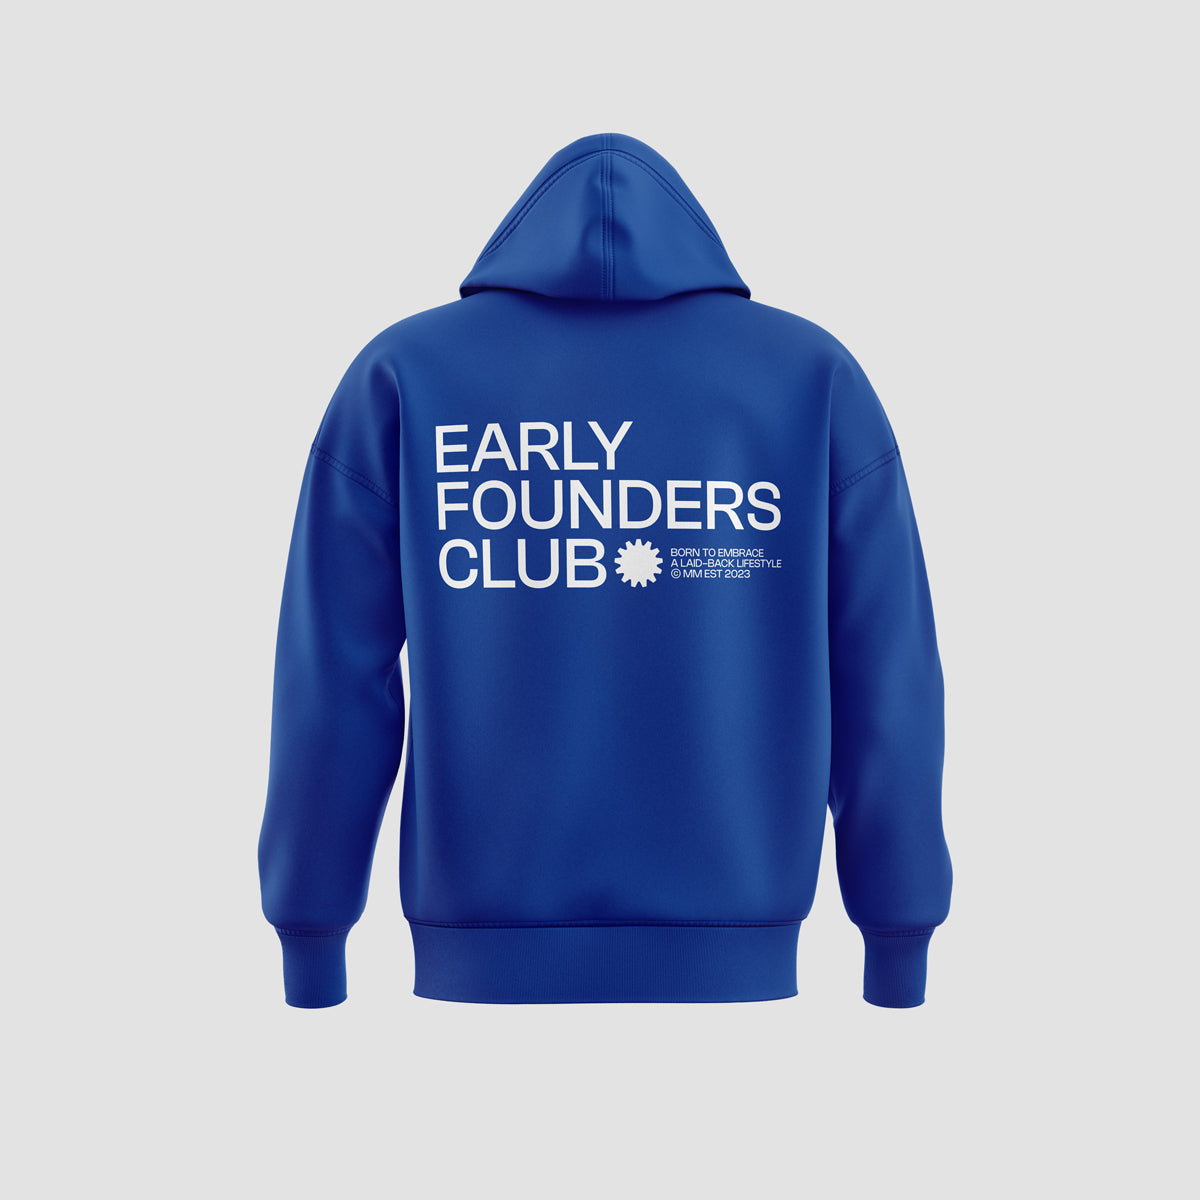 Early founders club hoodie - Blue/white